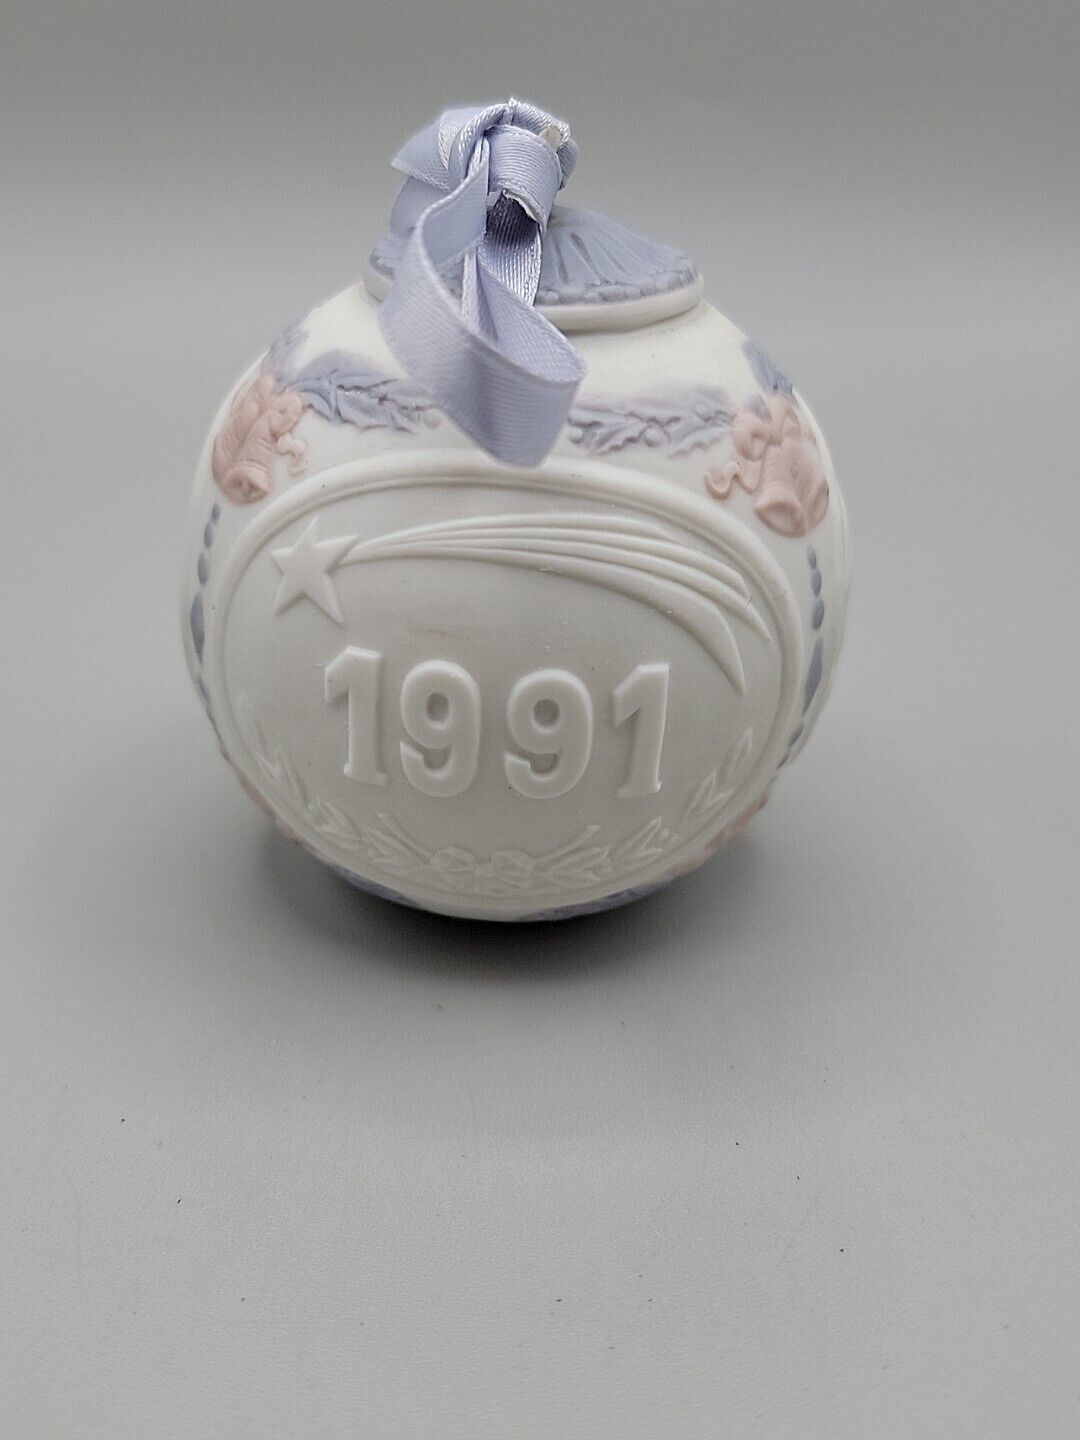 Vintage Lladro 1991 Christmas Ball Ornament Made In Spain Blue Purple 